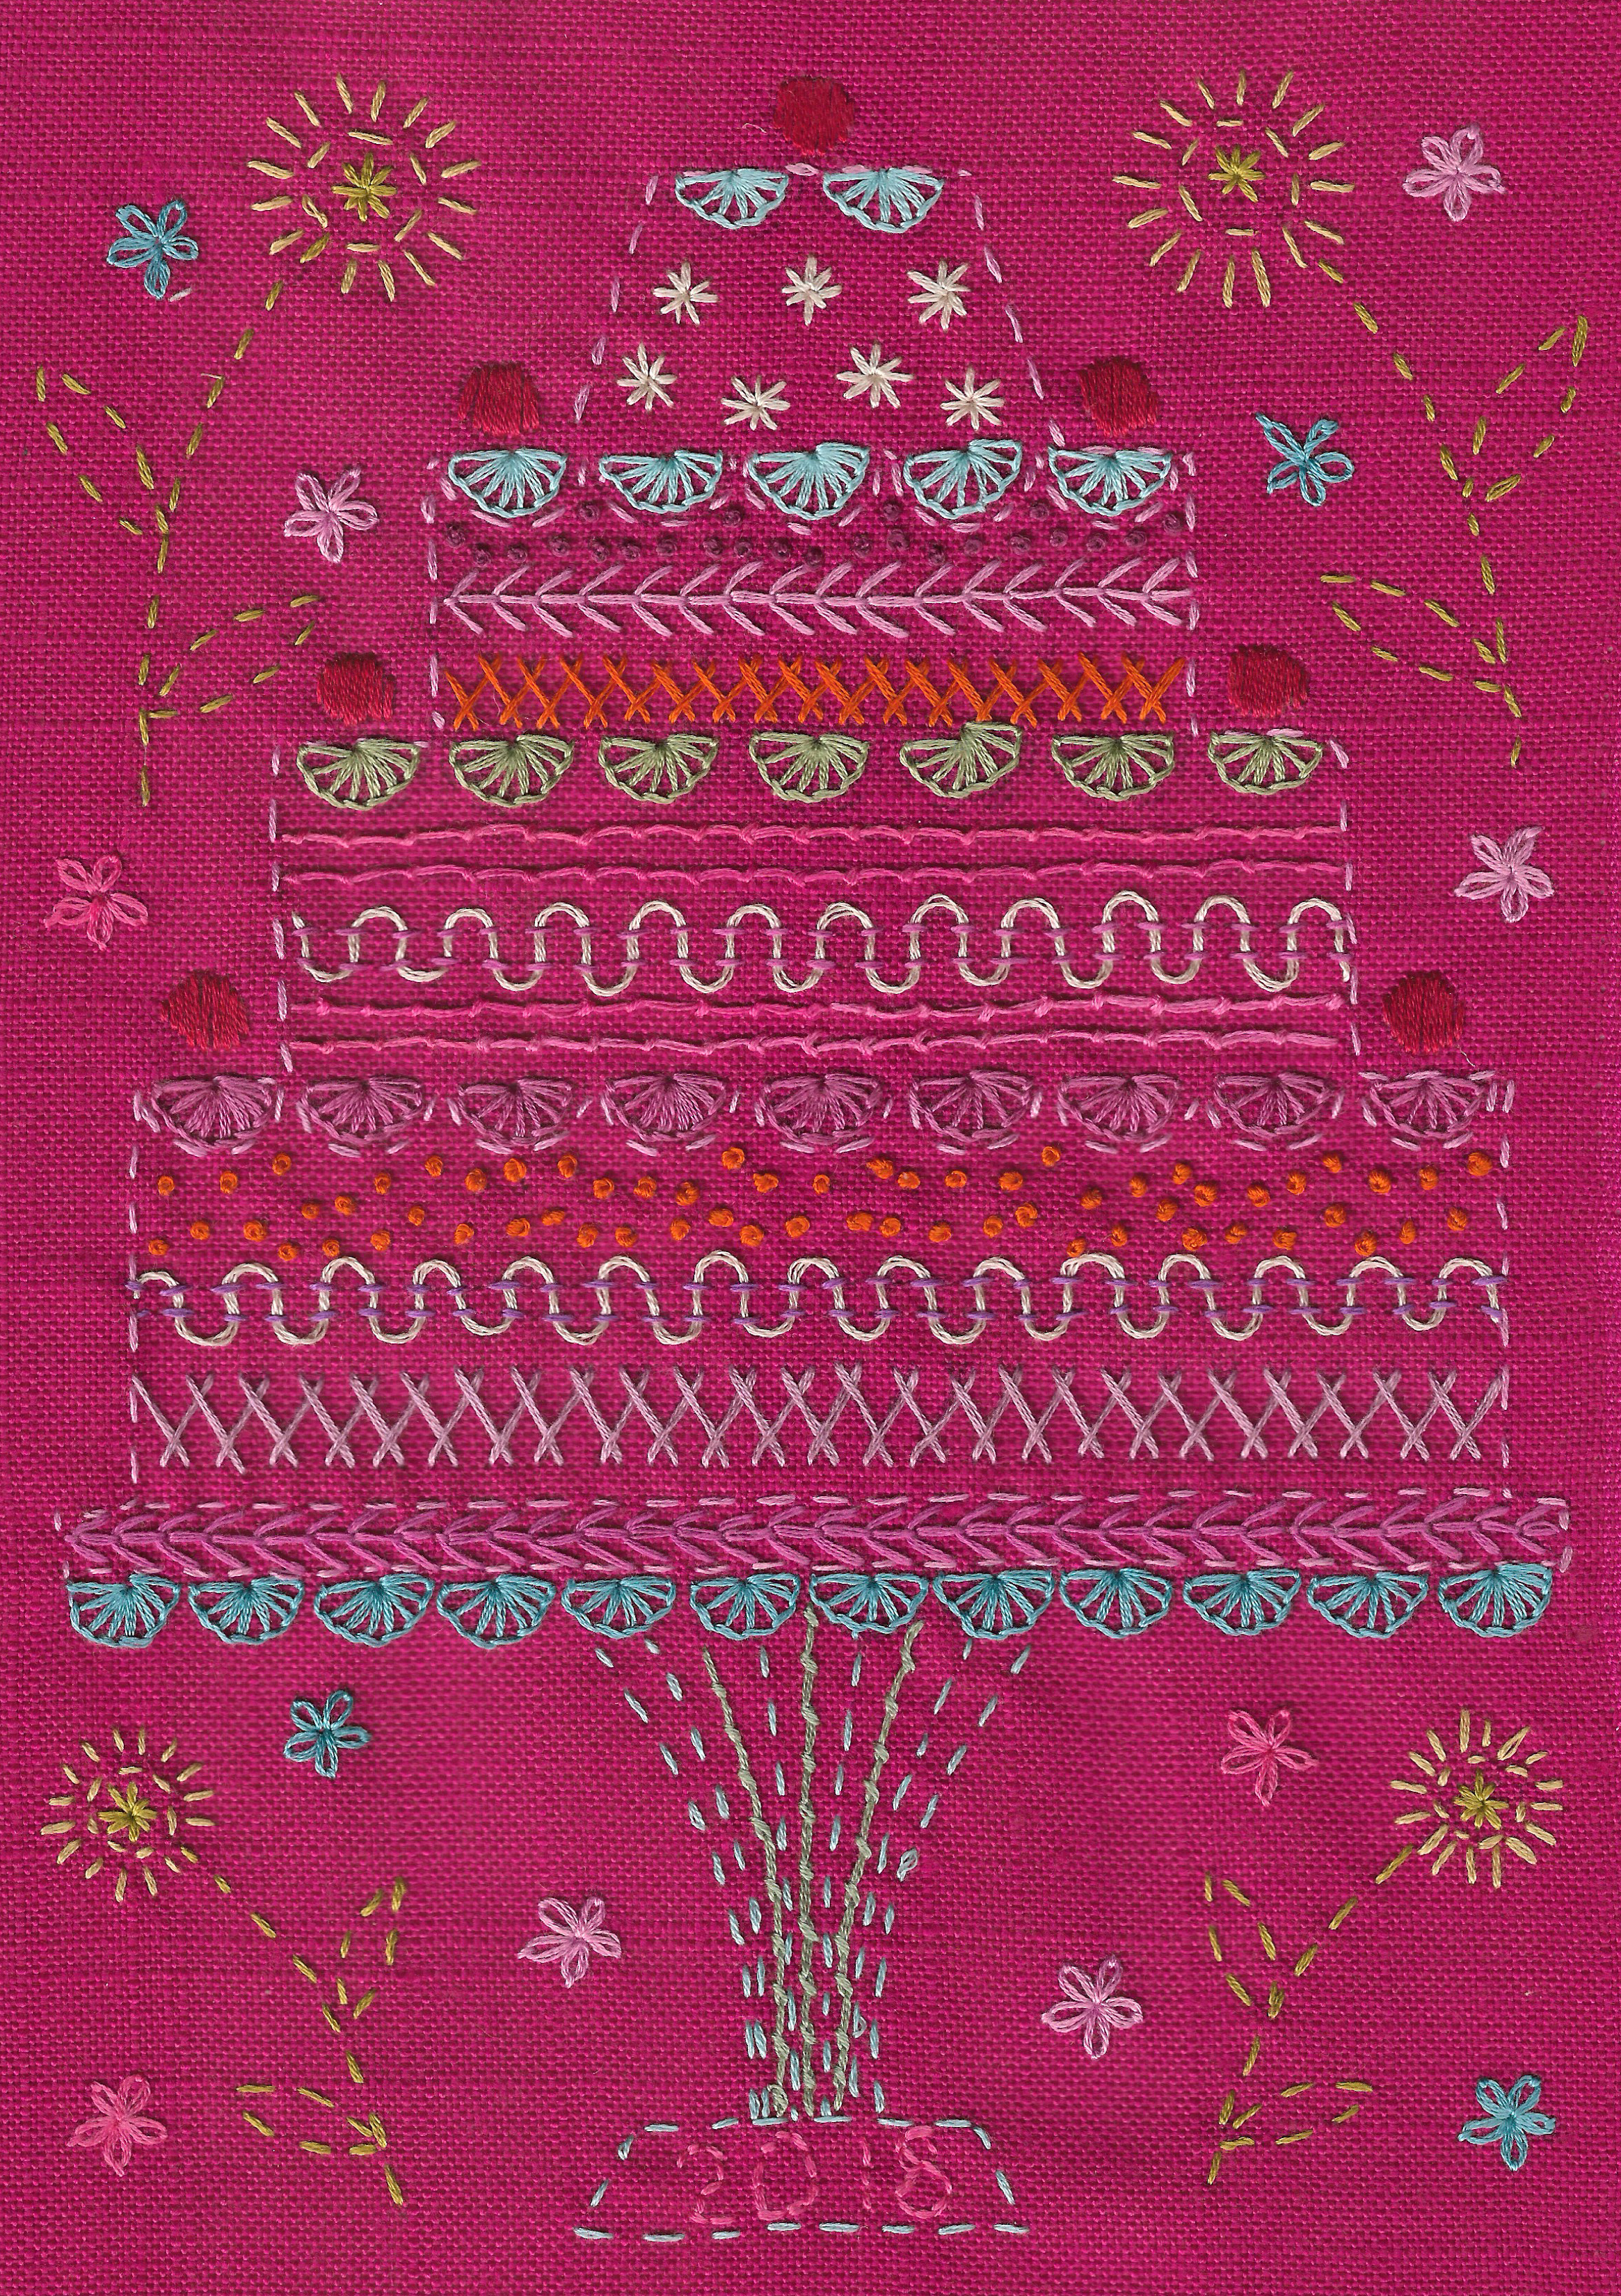 Iron On Transfer Patterns For Embroidery Cake Iron On Transfer Embroidery Pattern